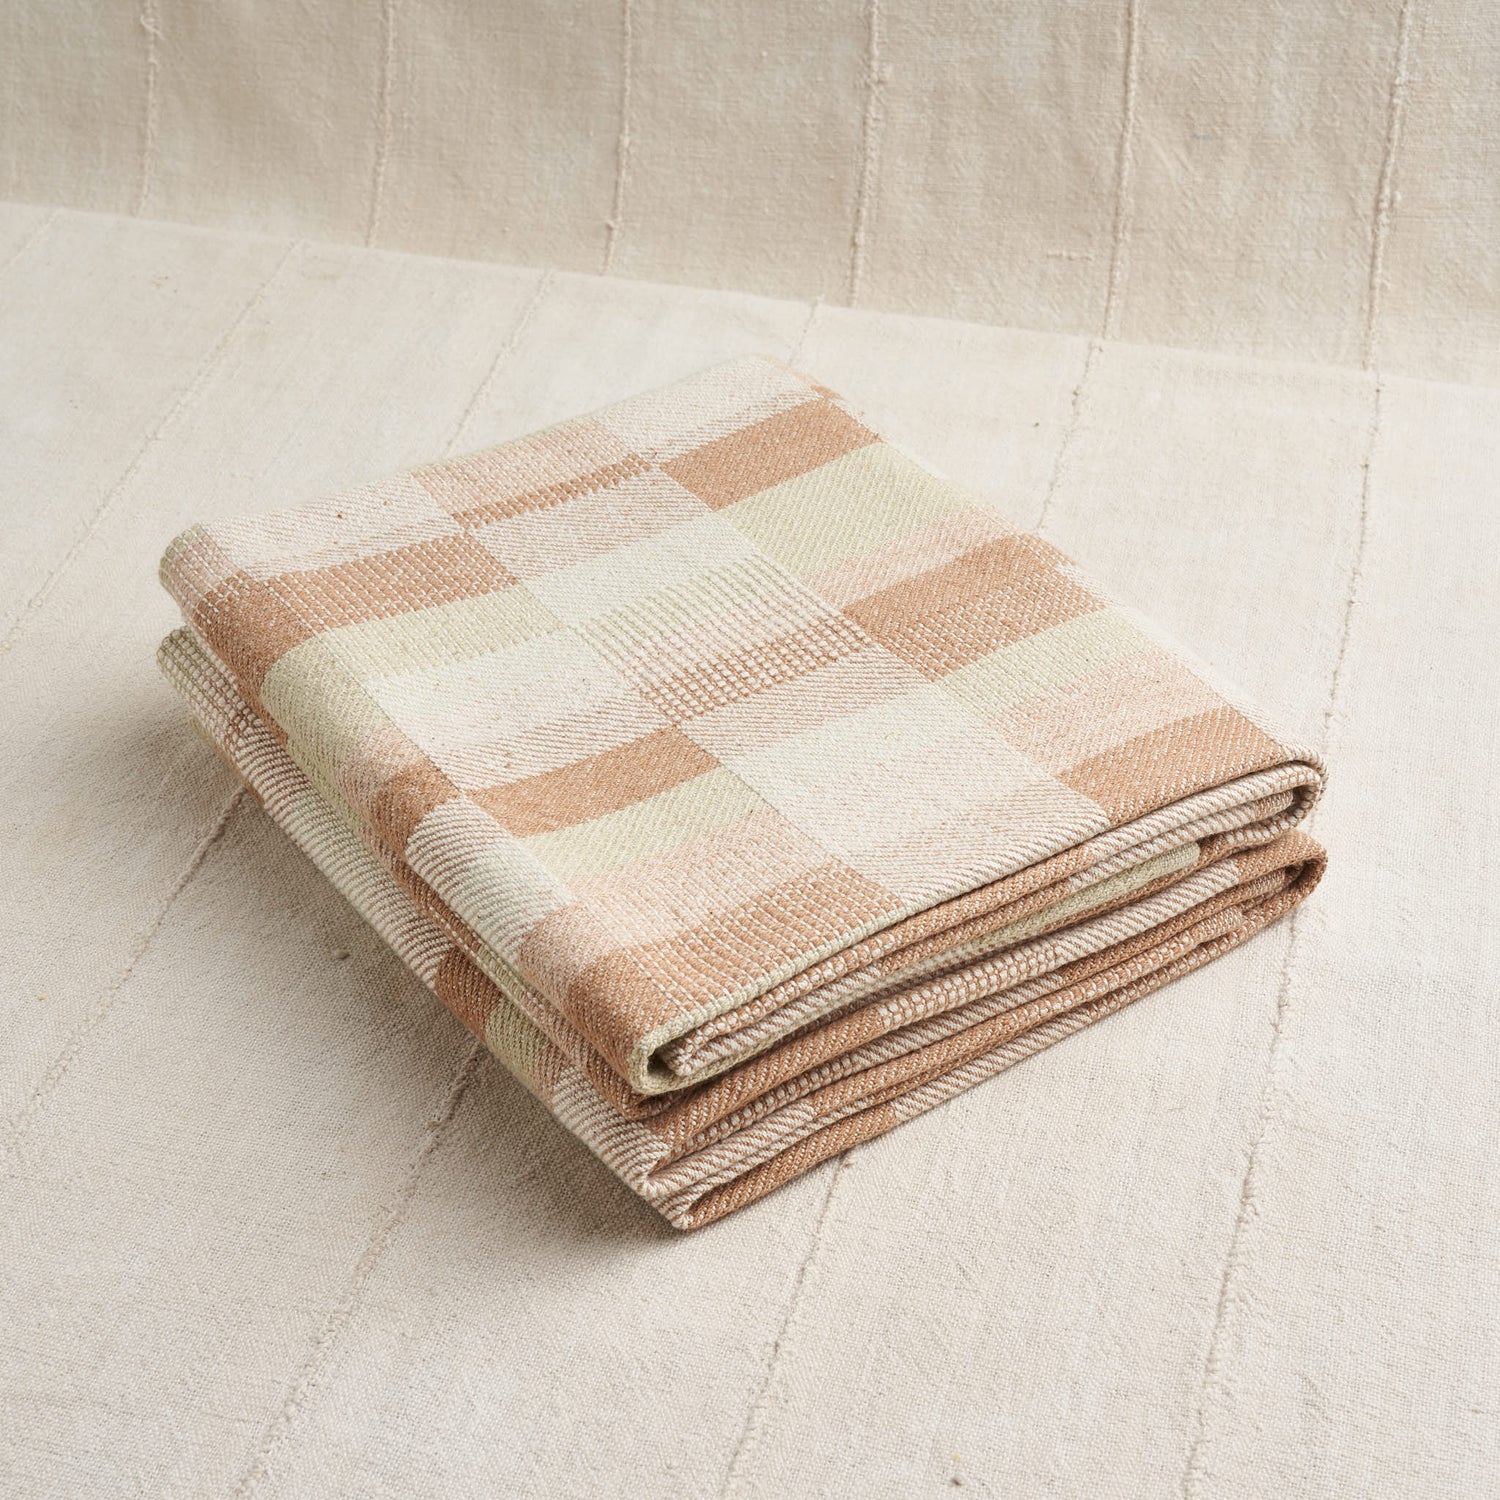 Everyday Hand Towel in Fawn - Ethical Home Decor